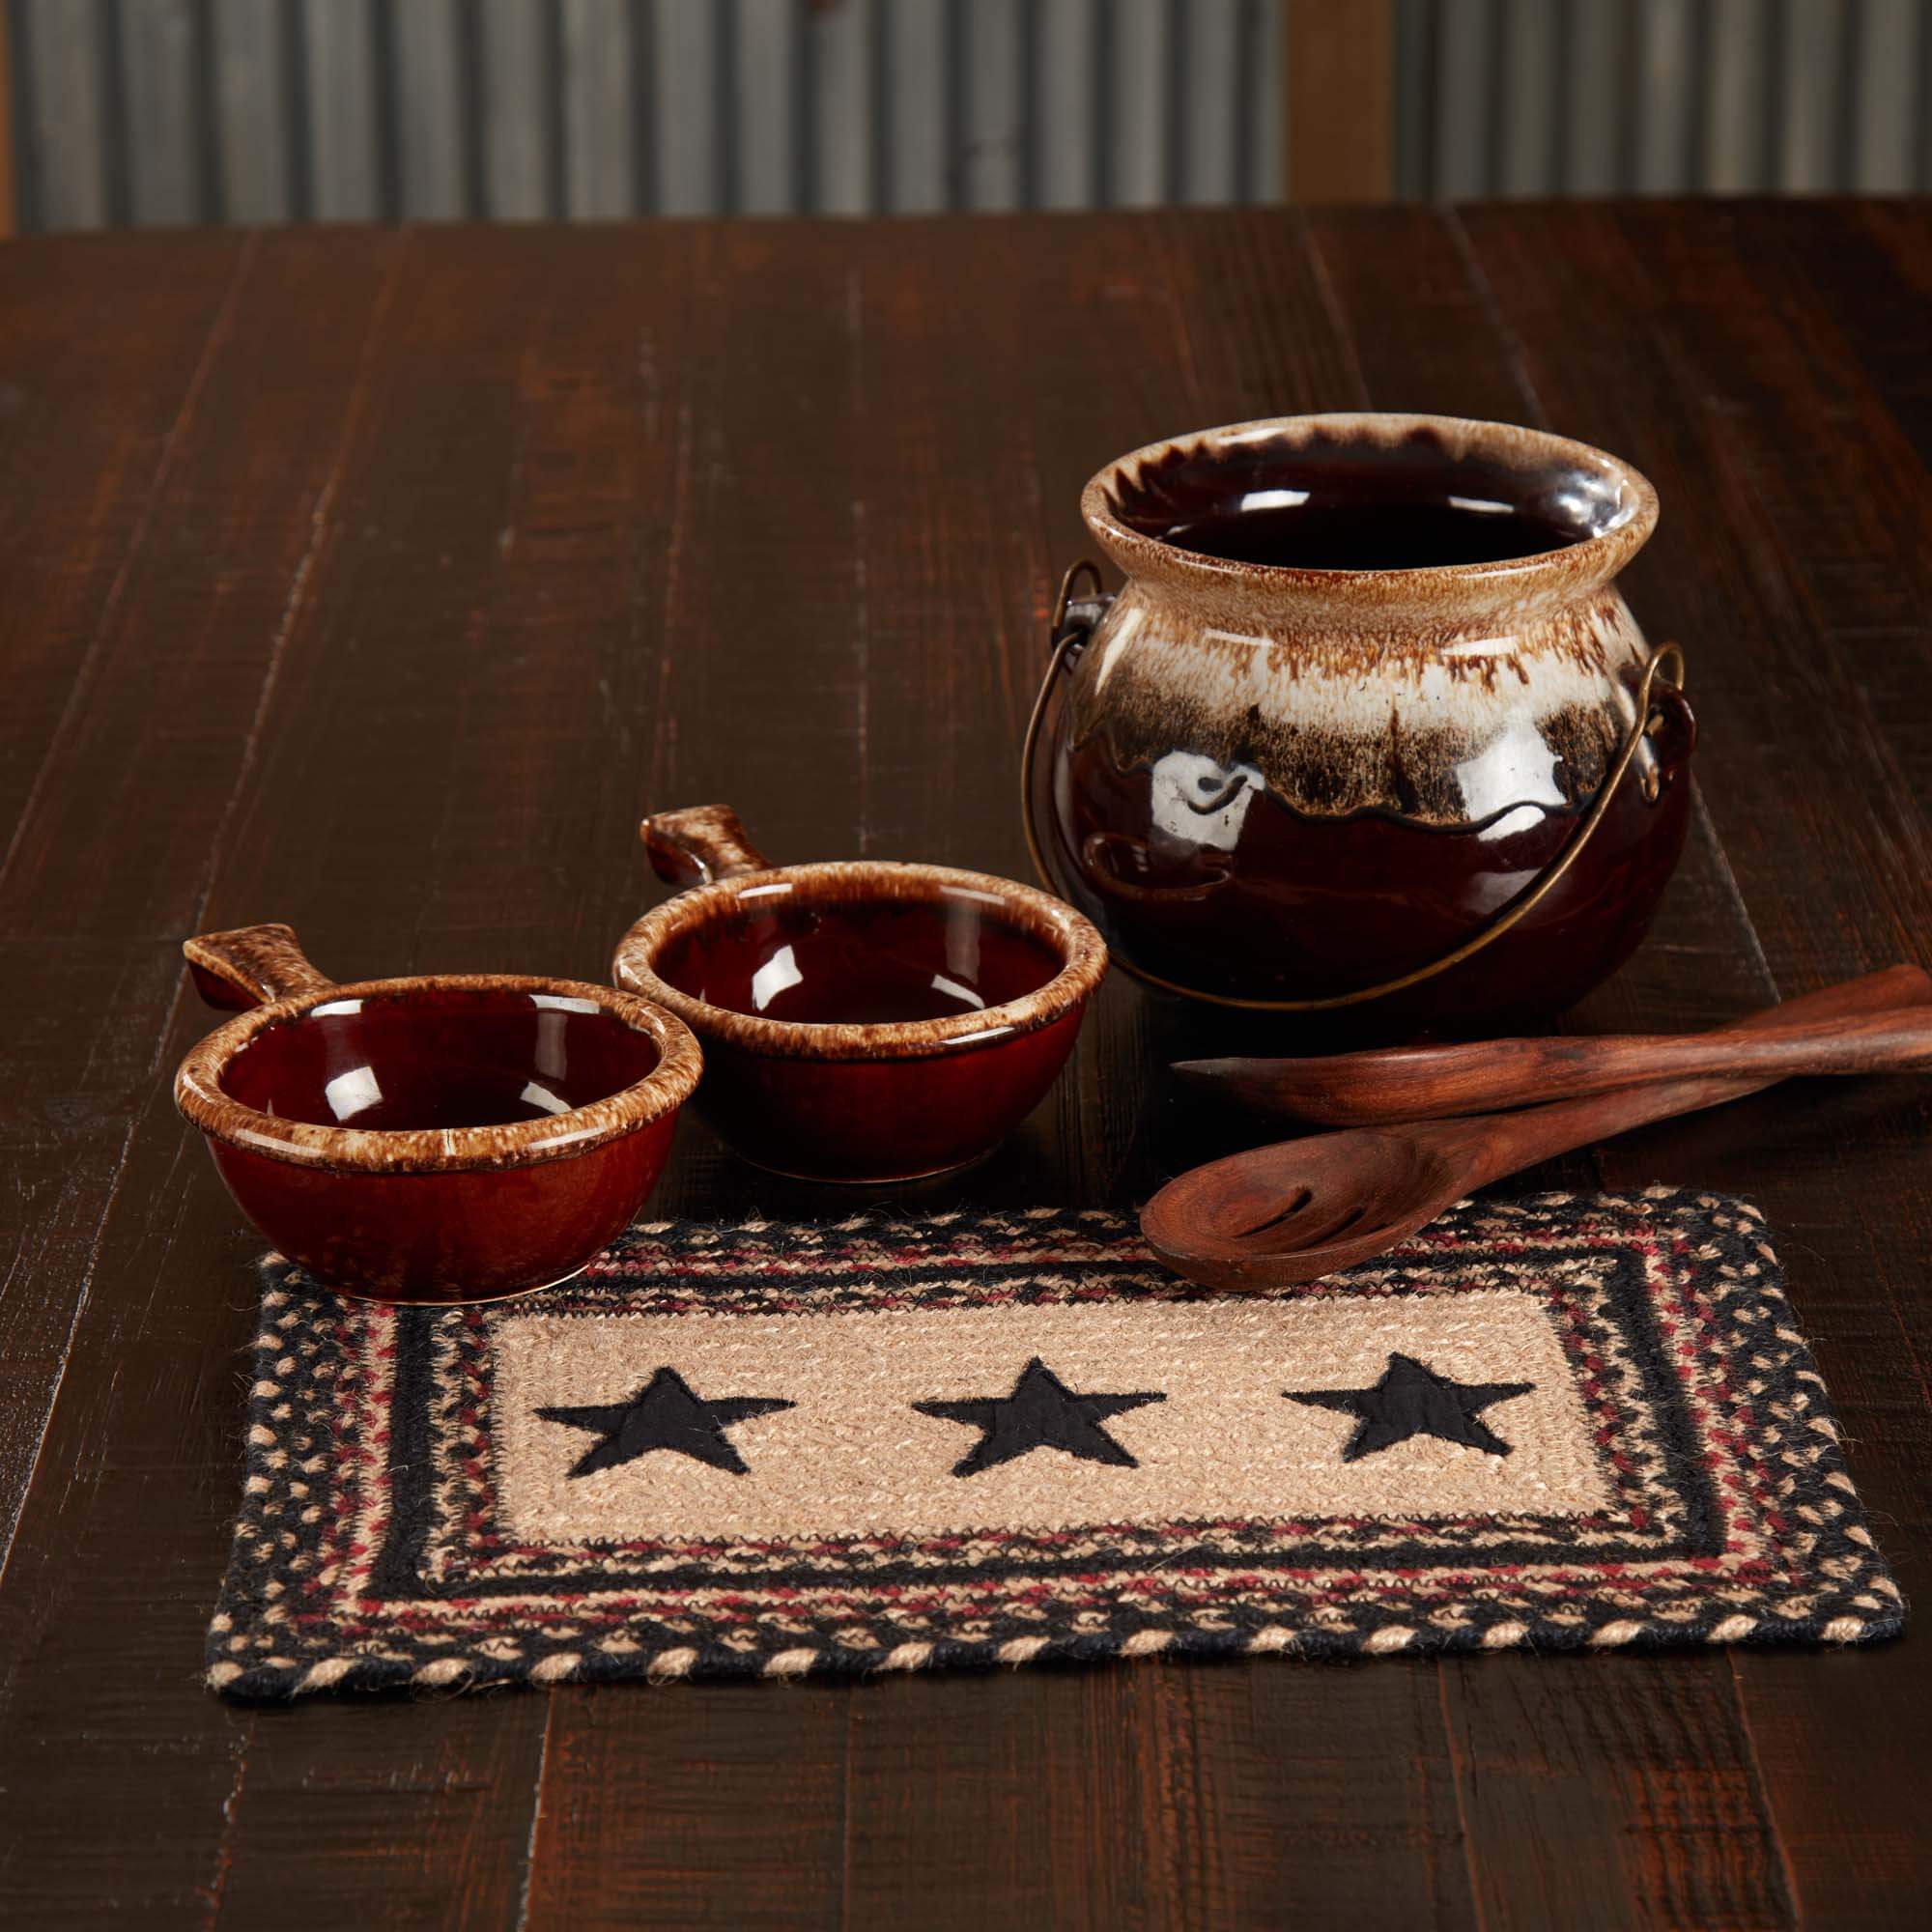 Colonial Star Tableware and Kitchenware